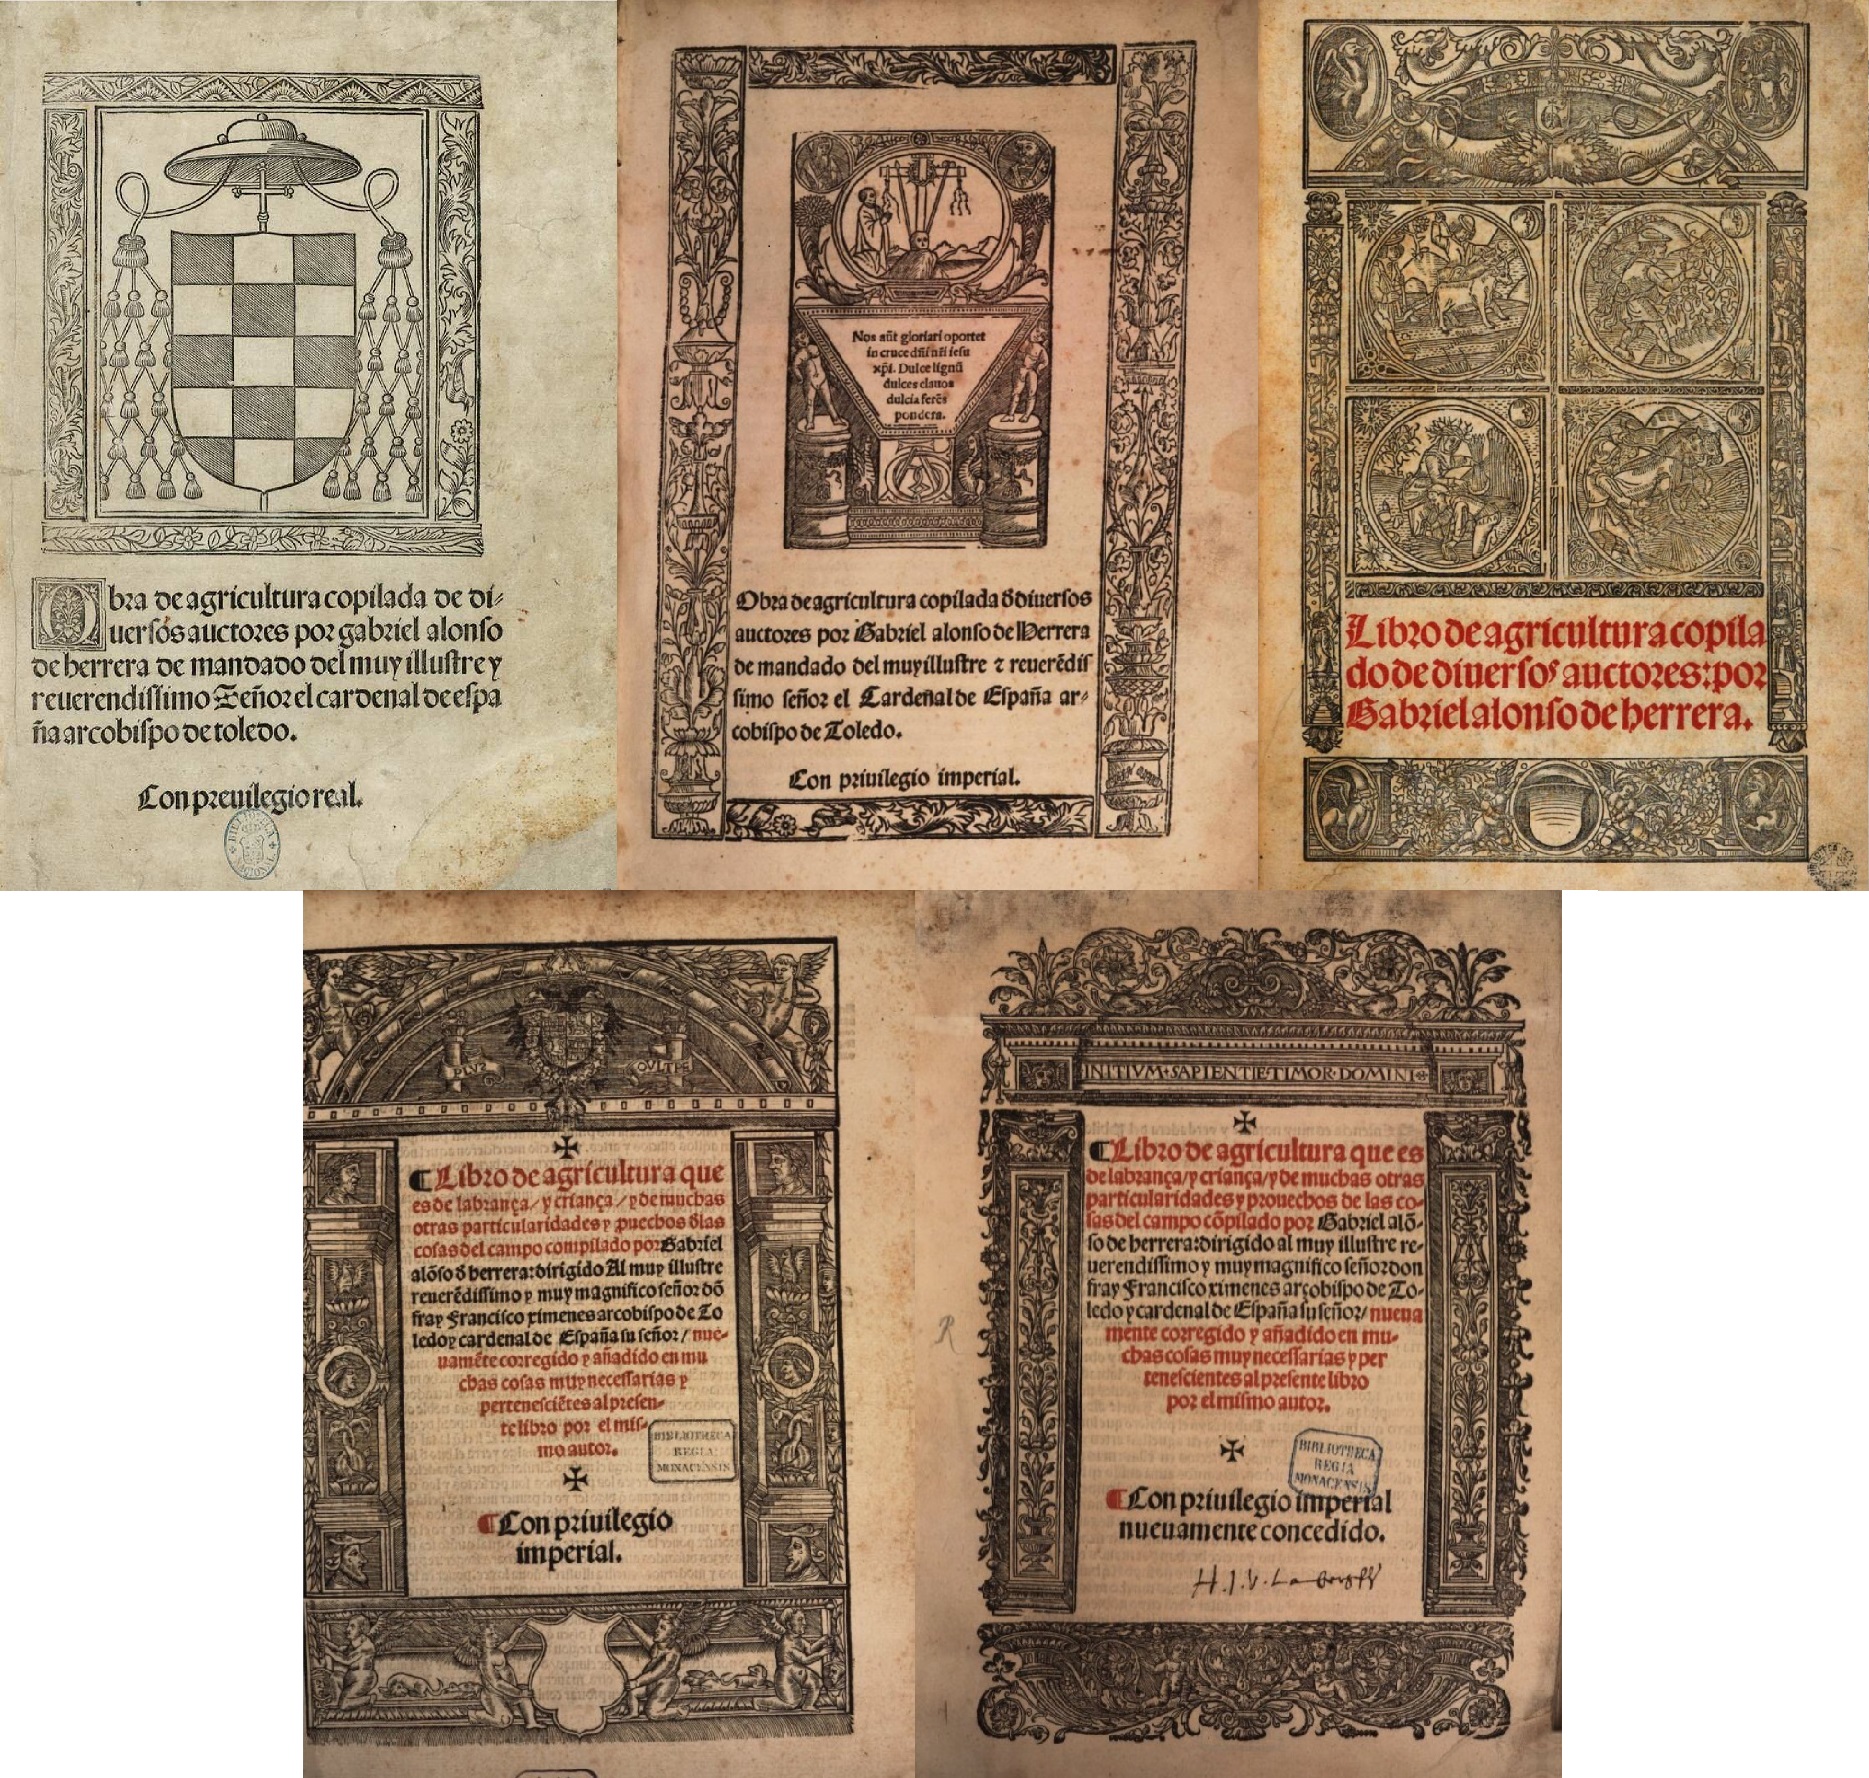 Covers of some editions of the Work of Agriculture (later, Book of Agriculture) published during the author’s lifetime (Alcalá de Henares 1513, Toledo 1520, Zaragoza 1524, Logroño 1528, Alcalá de Henares 1539). Spanish Ministry of Agriculture, Fishery and Food, 2014